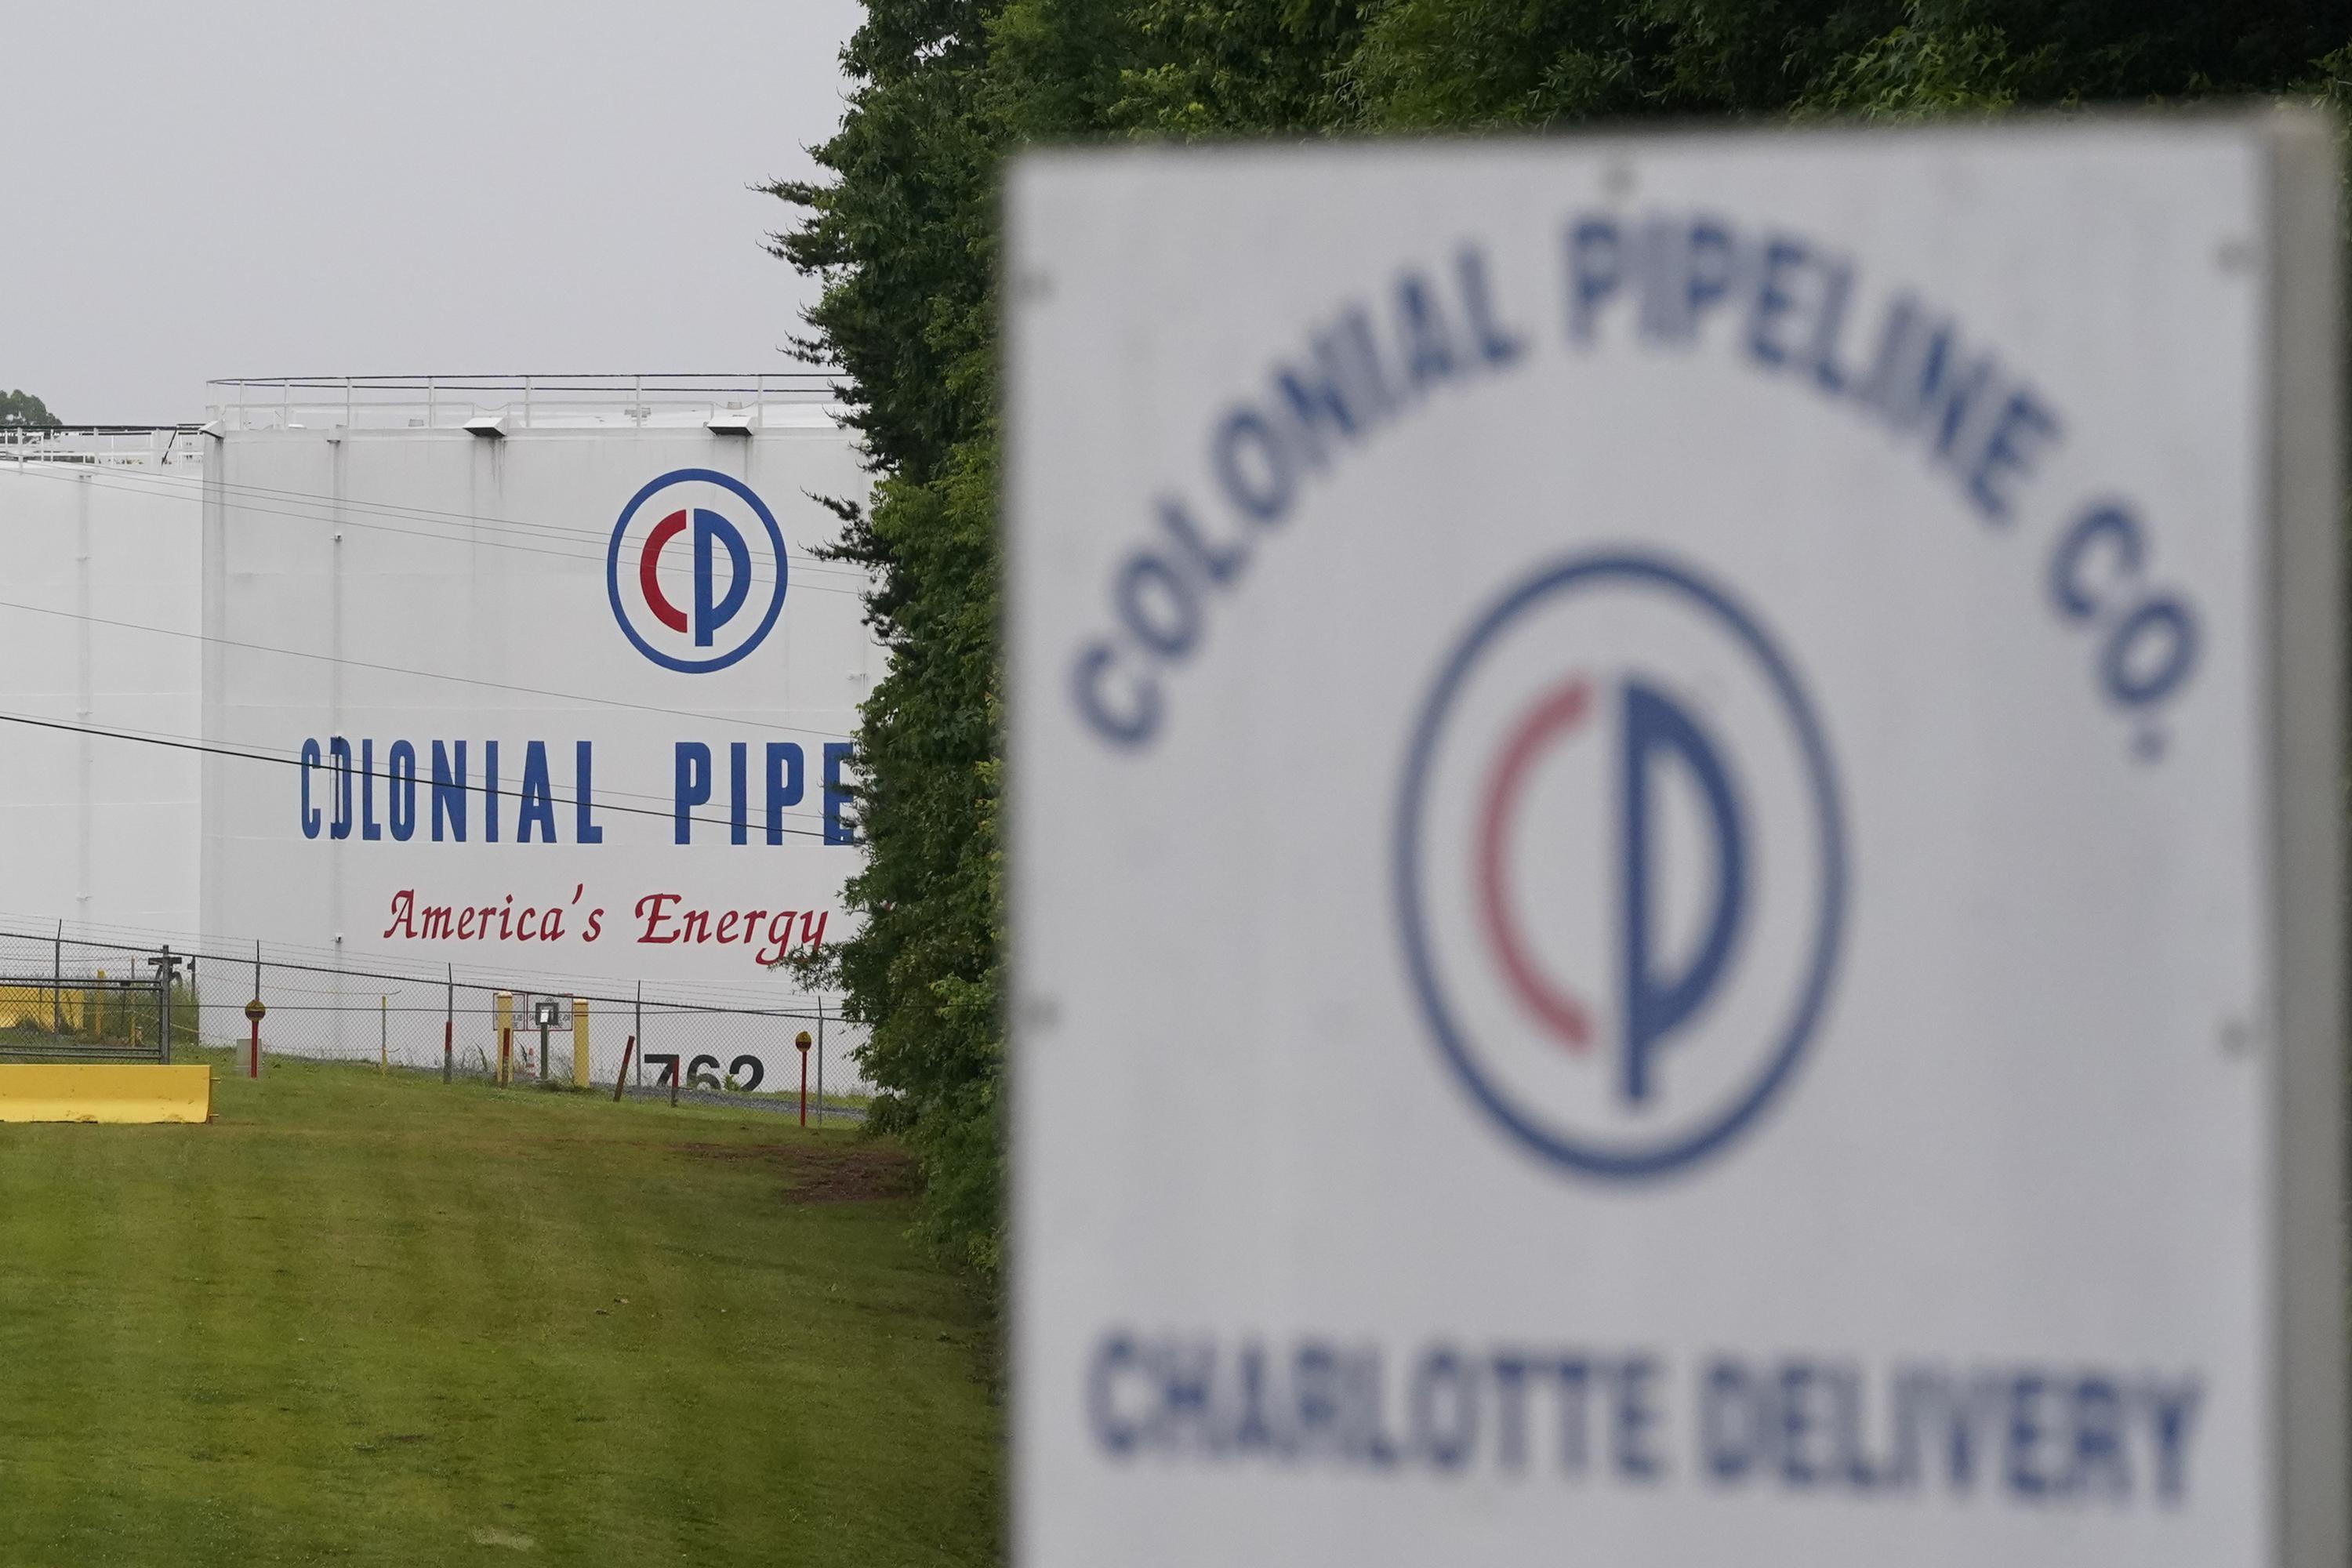 BOSTON (AP) — An outside audit three years ago of the major East Coast pipeline company hit by a cyberattack found “atrocious” information manag